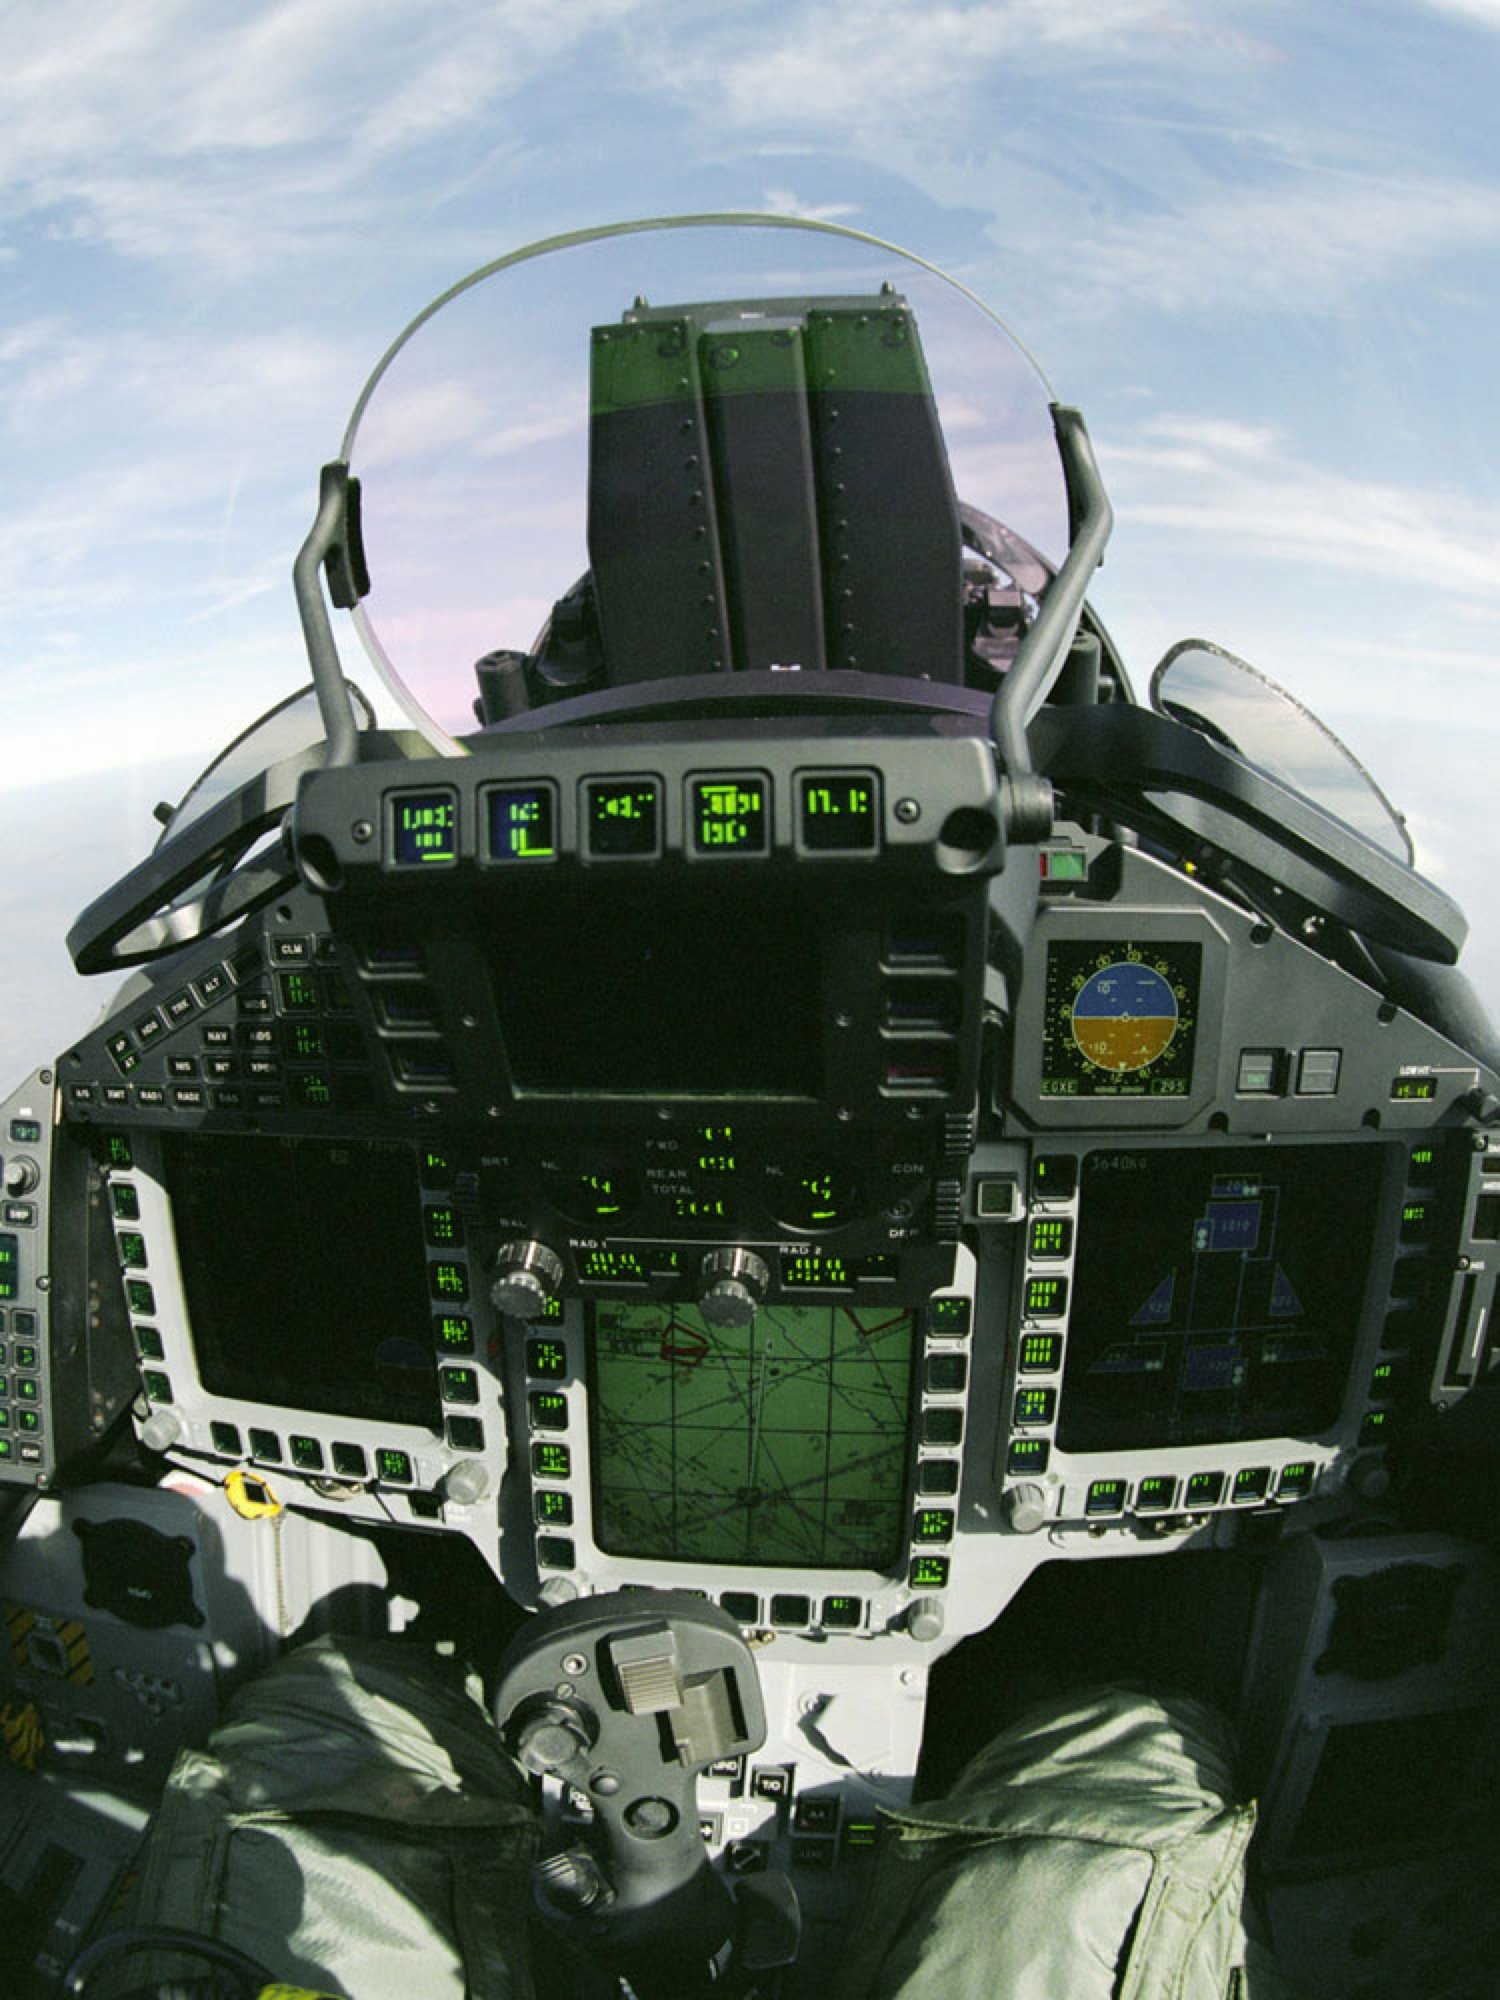 A Eurofighter cockpit with similar green monochrome displays and physical dials/buttons